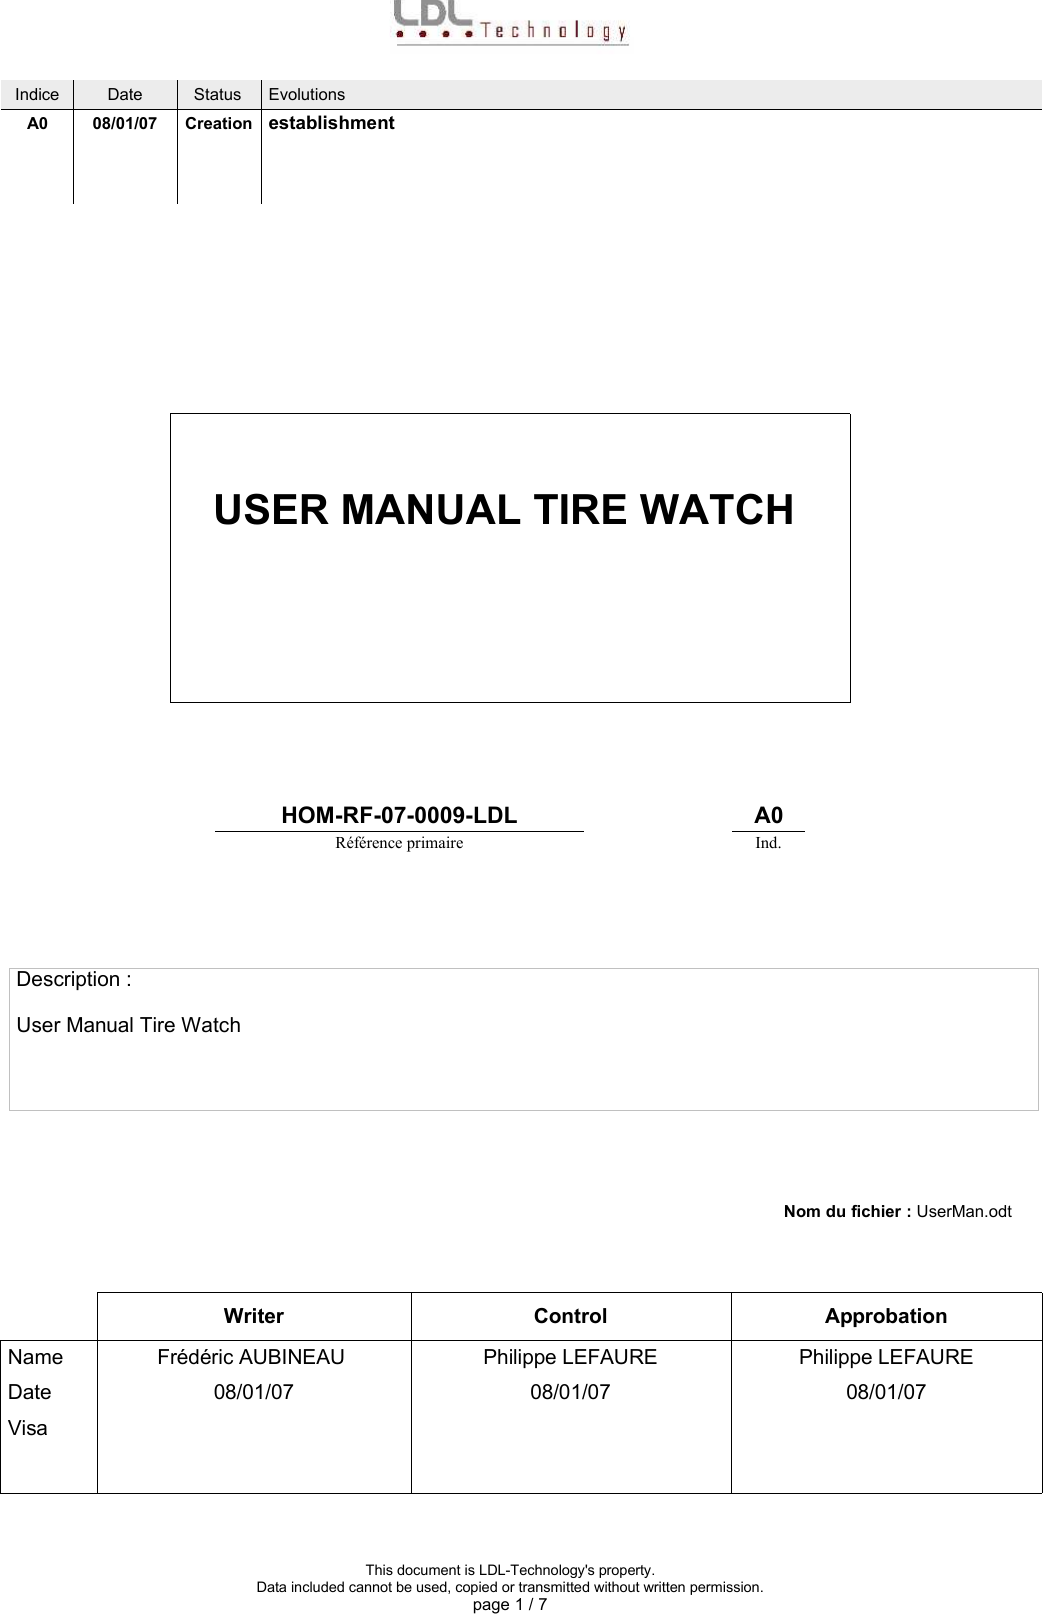 Indice Date Status EvolutionsA0 08/01/07 Creation establishmentUSER MANUAL TIRE WATCHHOM-RF-07-0009-LDL A0Référence primaire Ind.Description :User Manual Tire WatchNom du fichier : UserMan.odtWriter Control ApprobationName Frédéric AUBINEAU  Philippe LEFAUREZNGAPhilippe LEFAUREDate 08/01/07 08/01/07 08/01/07VisaThis document is LDL-Technology&apos;s property.Data included cannot be used, copied or transmitted without written permission.page 1 / 7